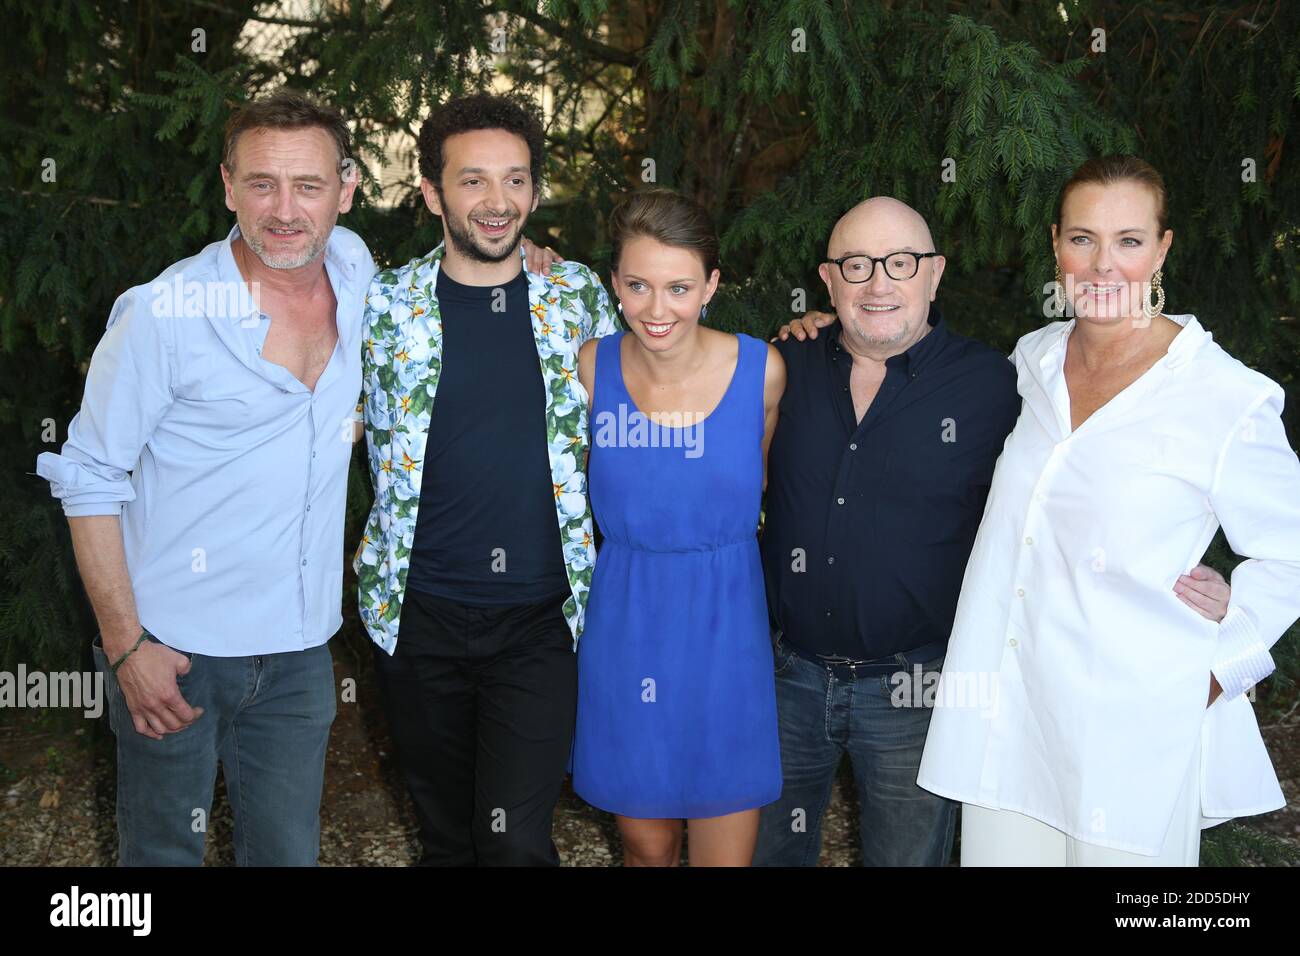 Jean-Paul Rouve, William Lebghil, Jeanne Guittet, Michel Blanc and Carole  Bouquet seen at the Voyez Comme On Danse photocall as part of the 11th  Angouleme Film Festival in Angouleme, France on August